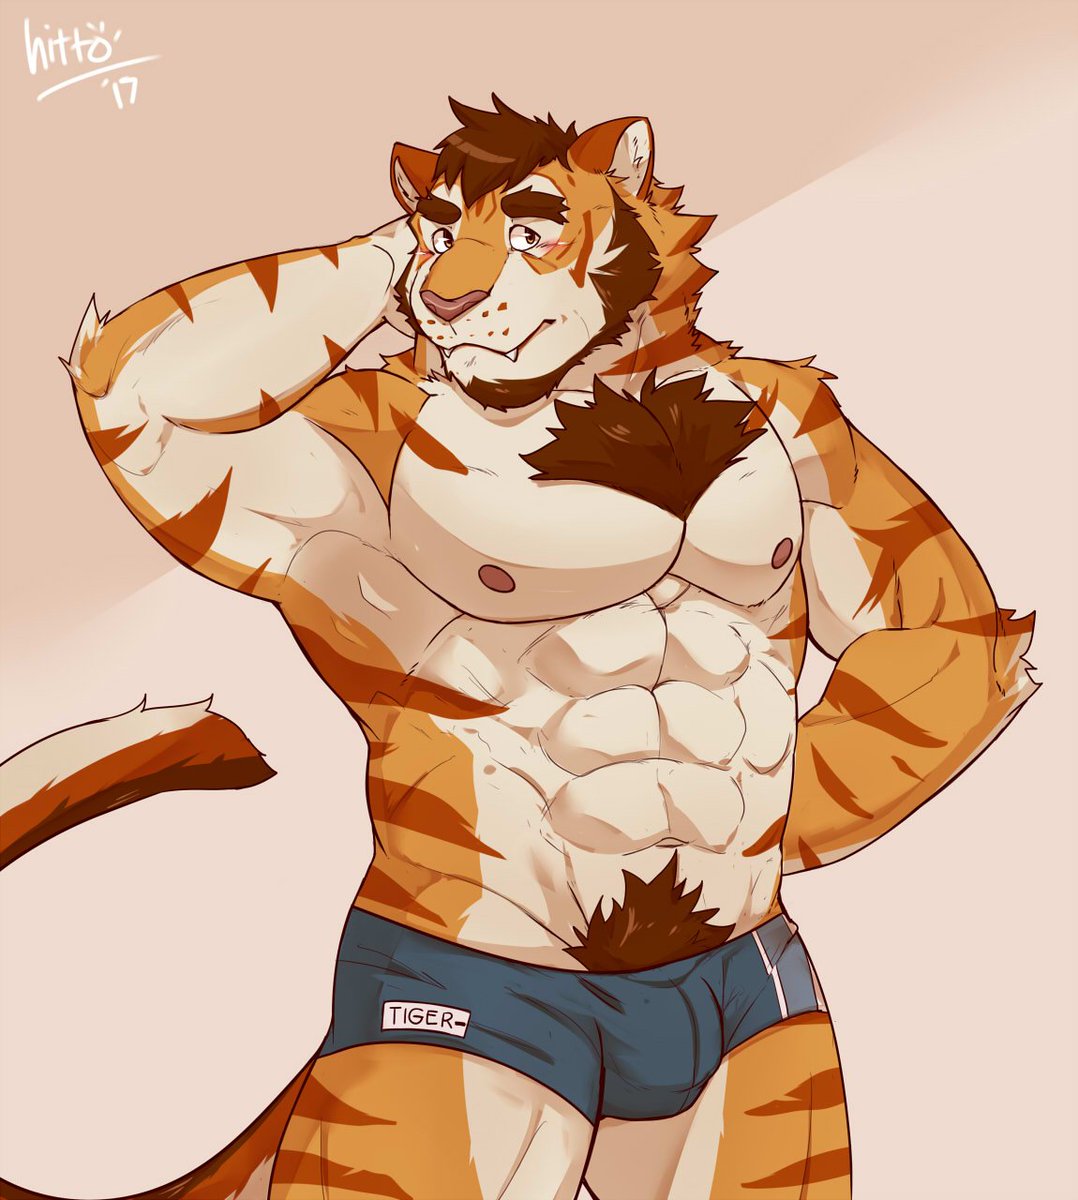 Commission for @toffeetiger 